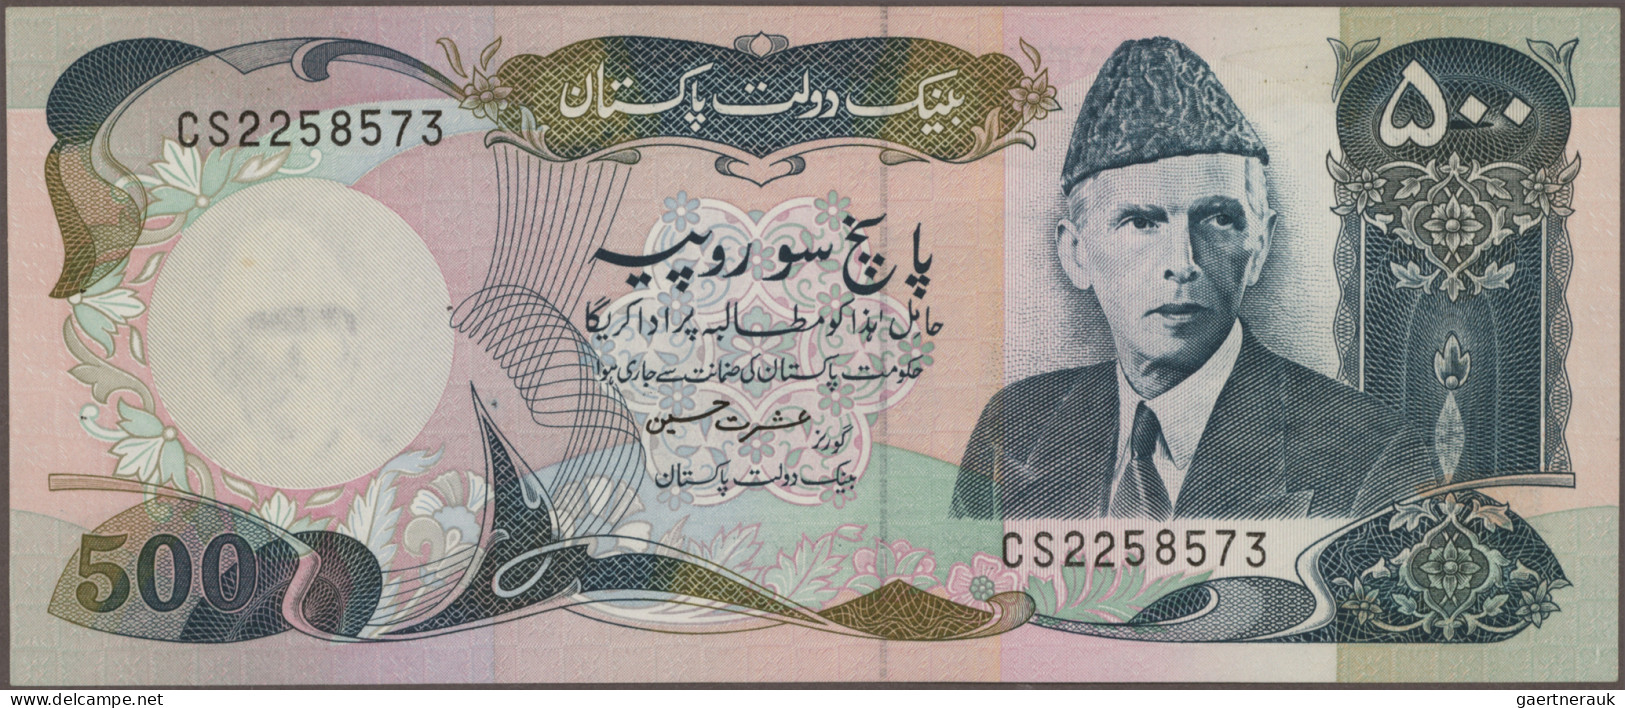 Pakistan: Government and State Bank of Pakistan, lot with 49 banknotes, series 1